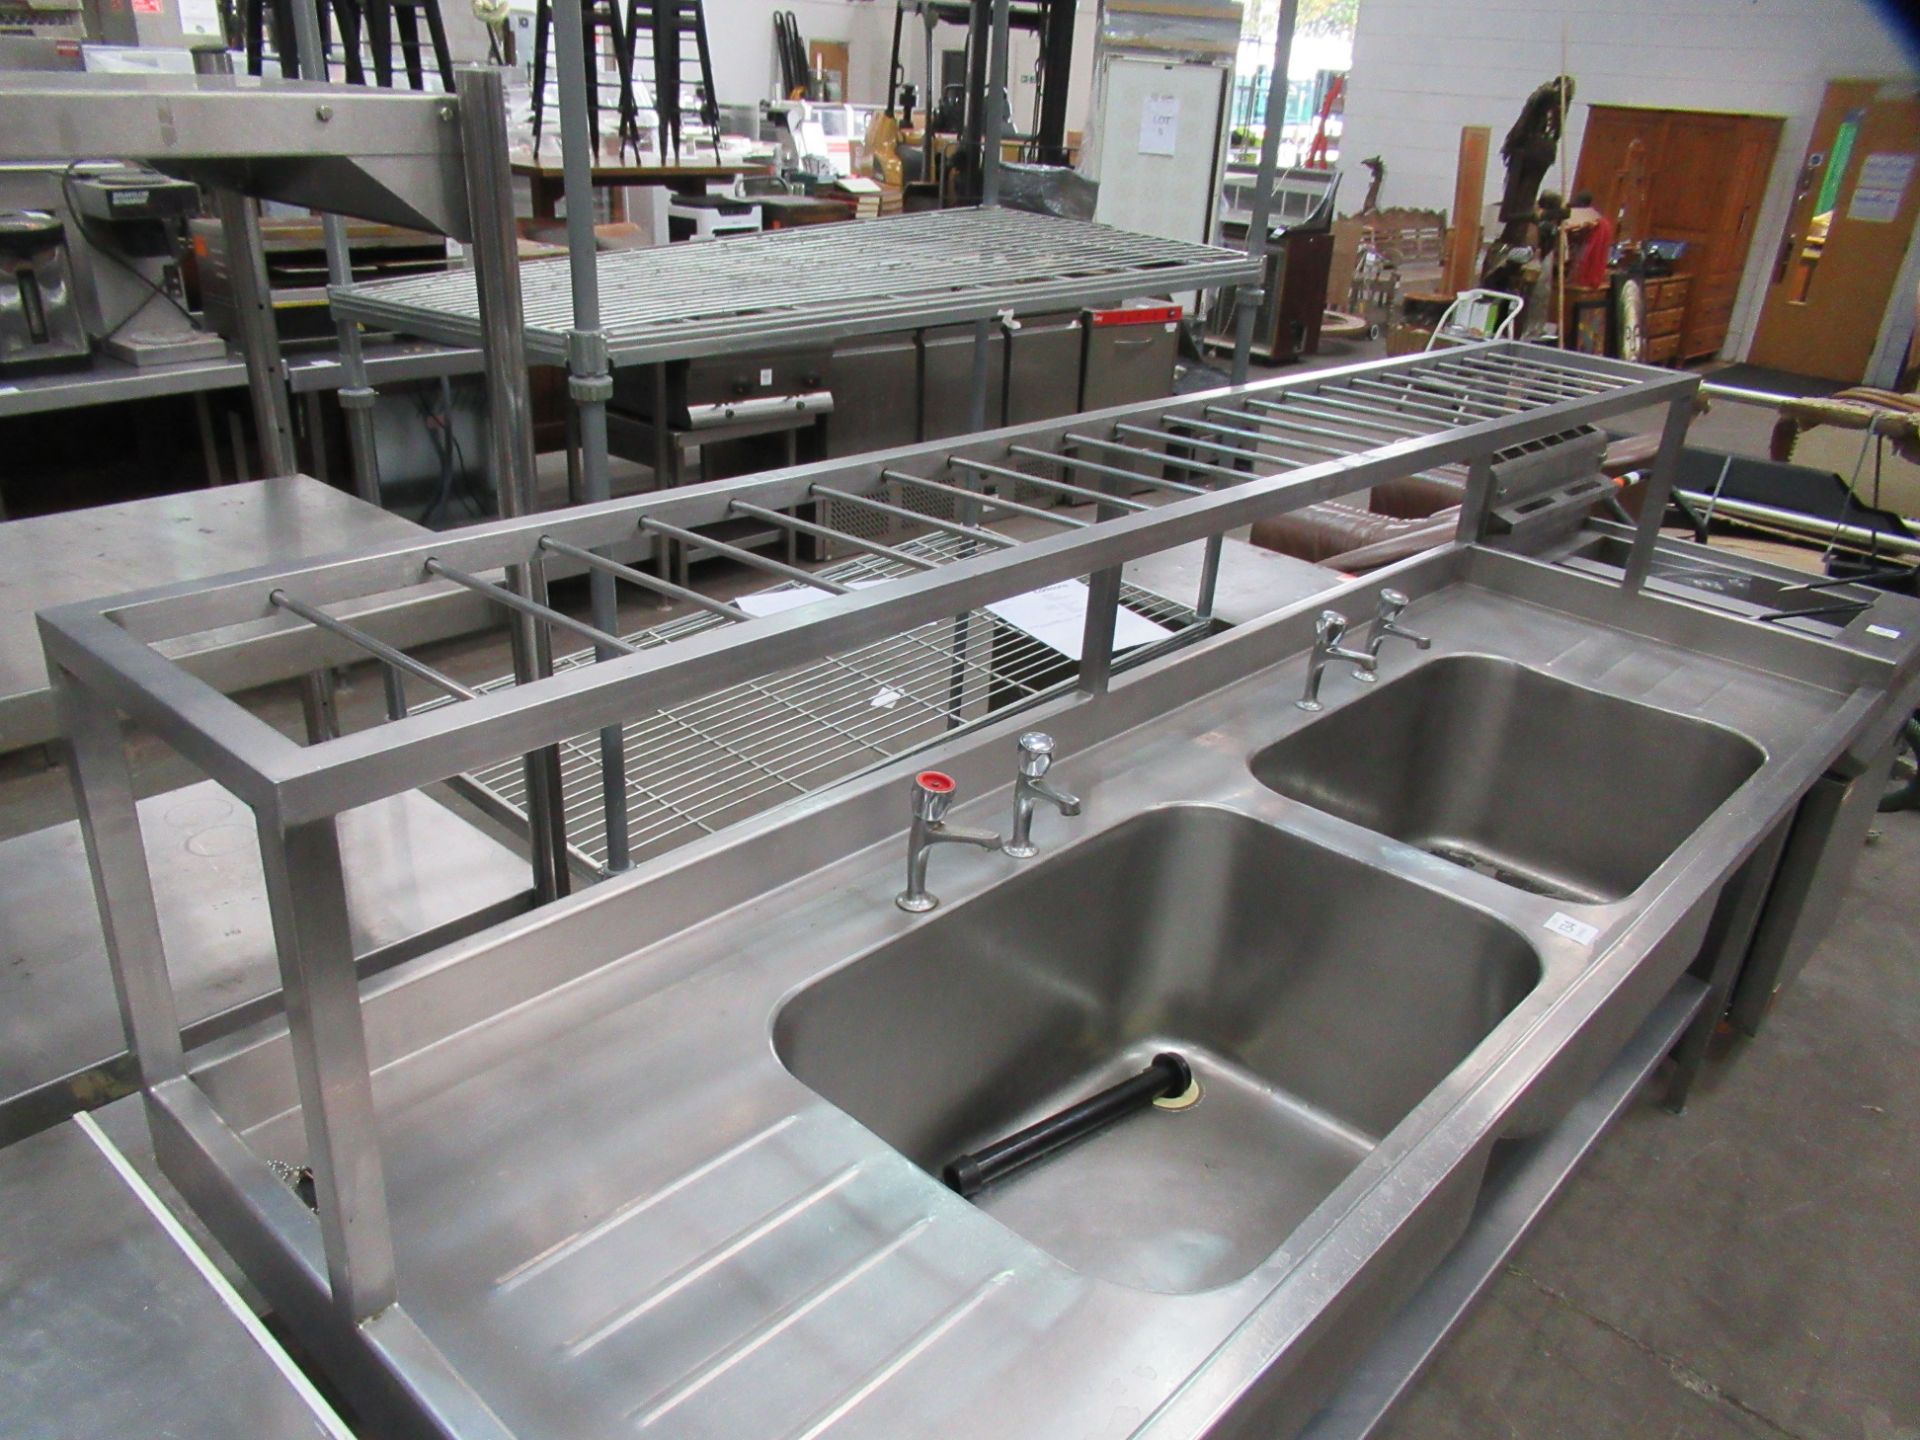 Large Stainless Steel Double Basin Sink Unit With Welded Rack & Under Tier - Image 2 of 4